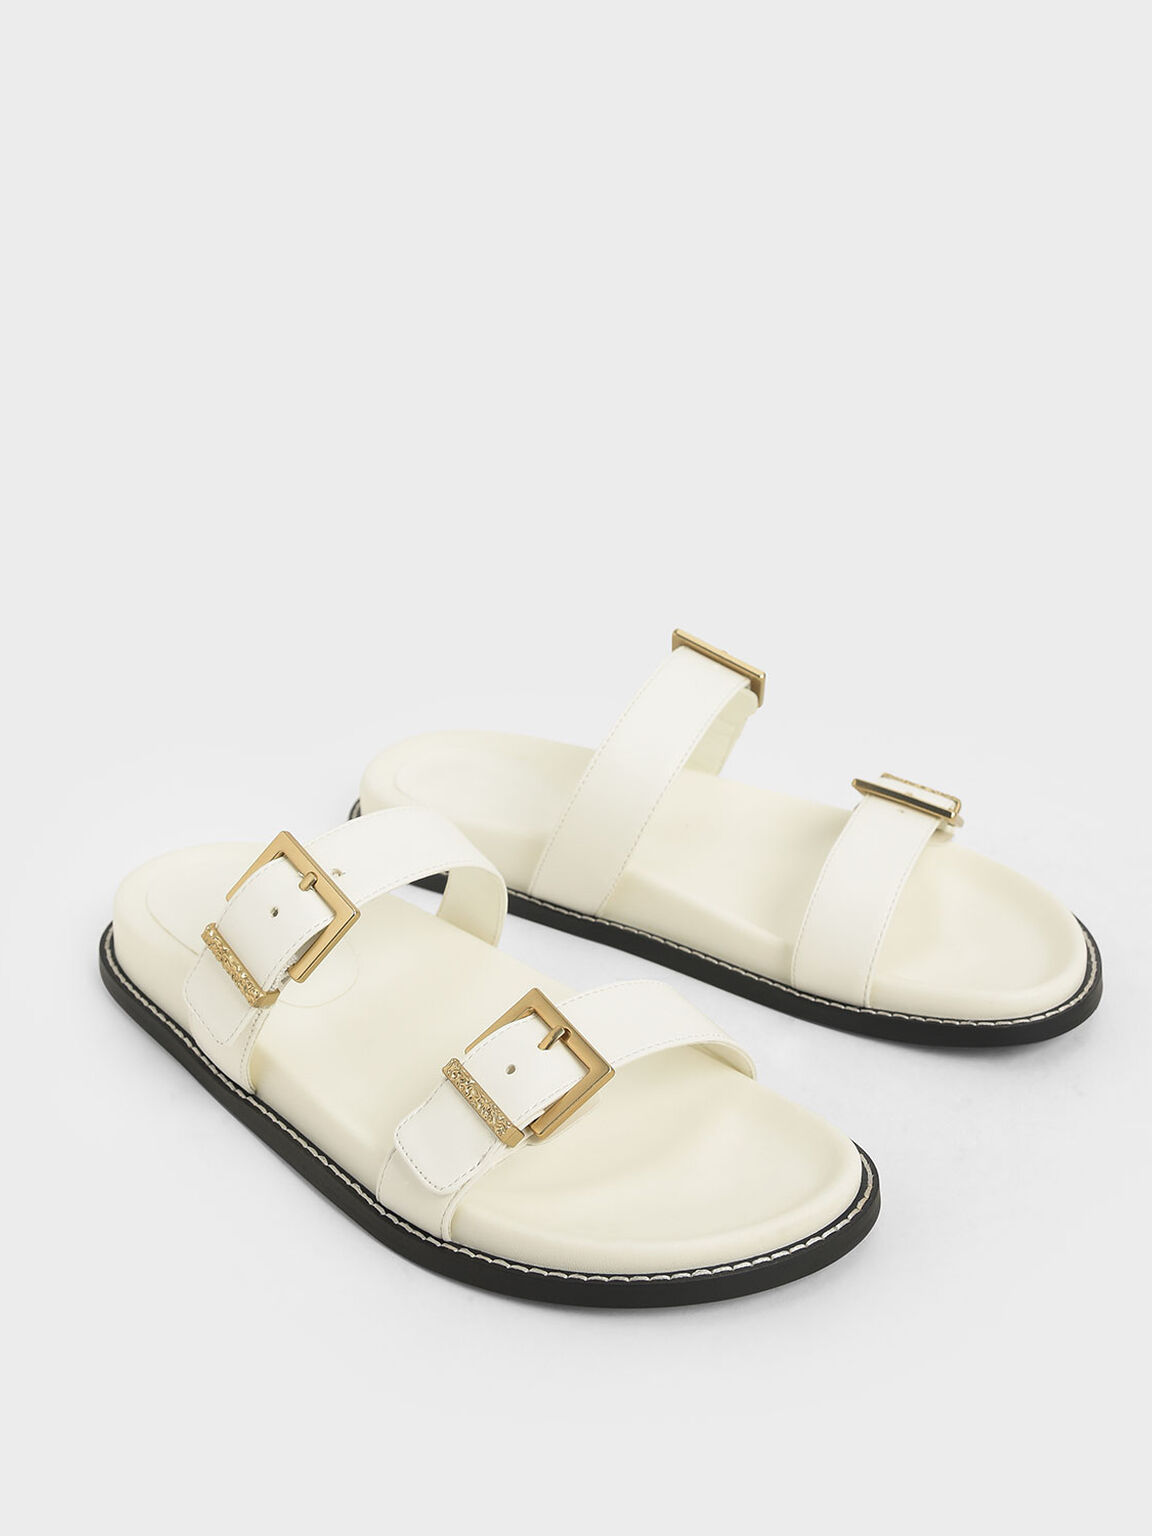 Buckle Double Strap Flats, White, hi-res